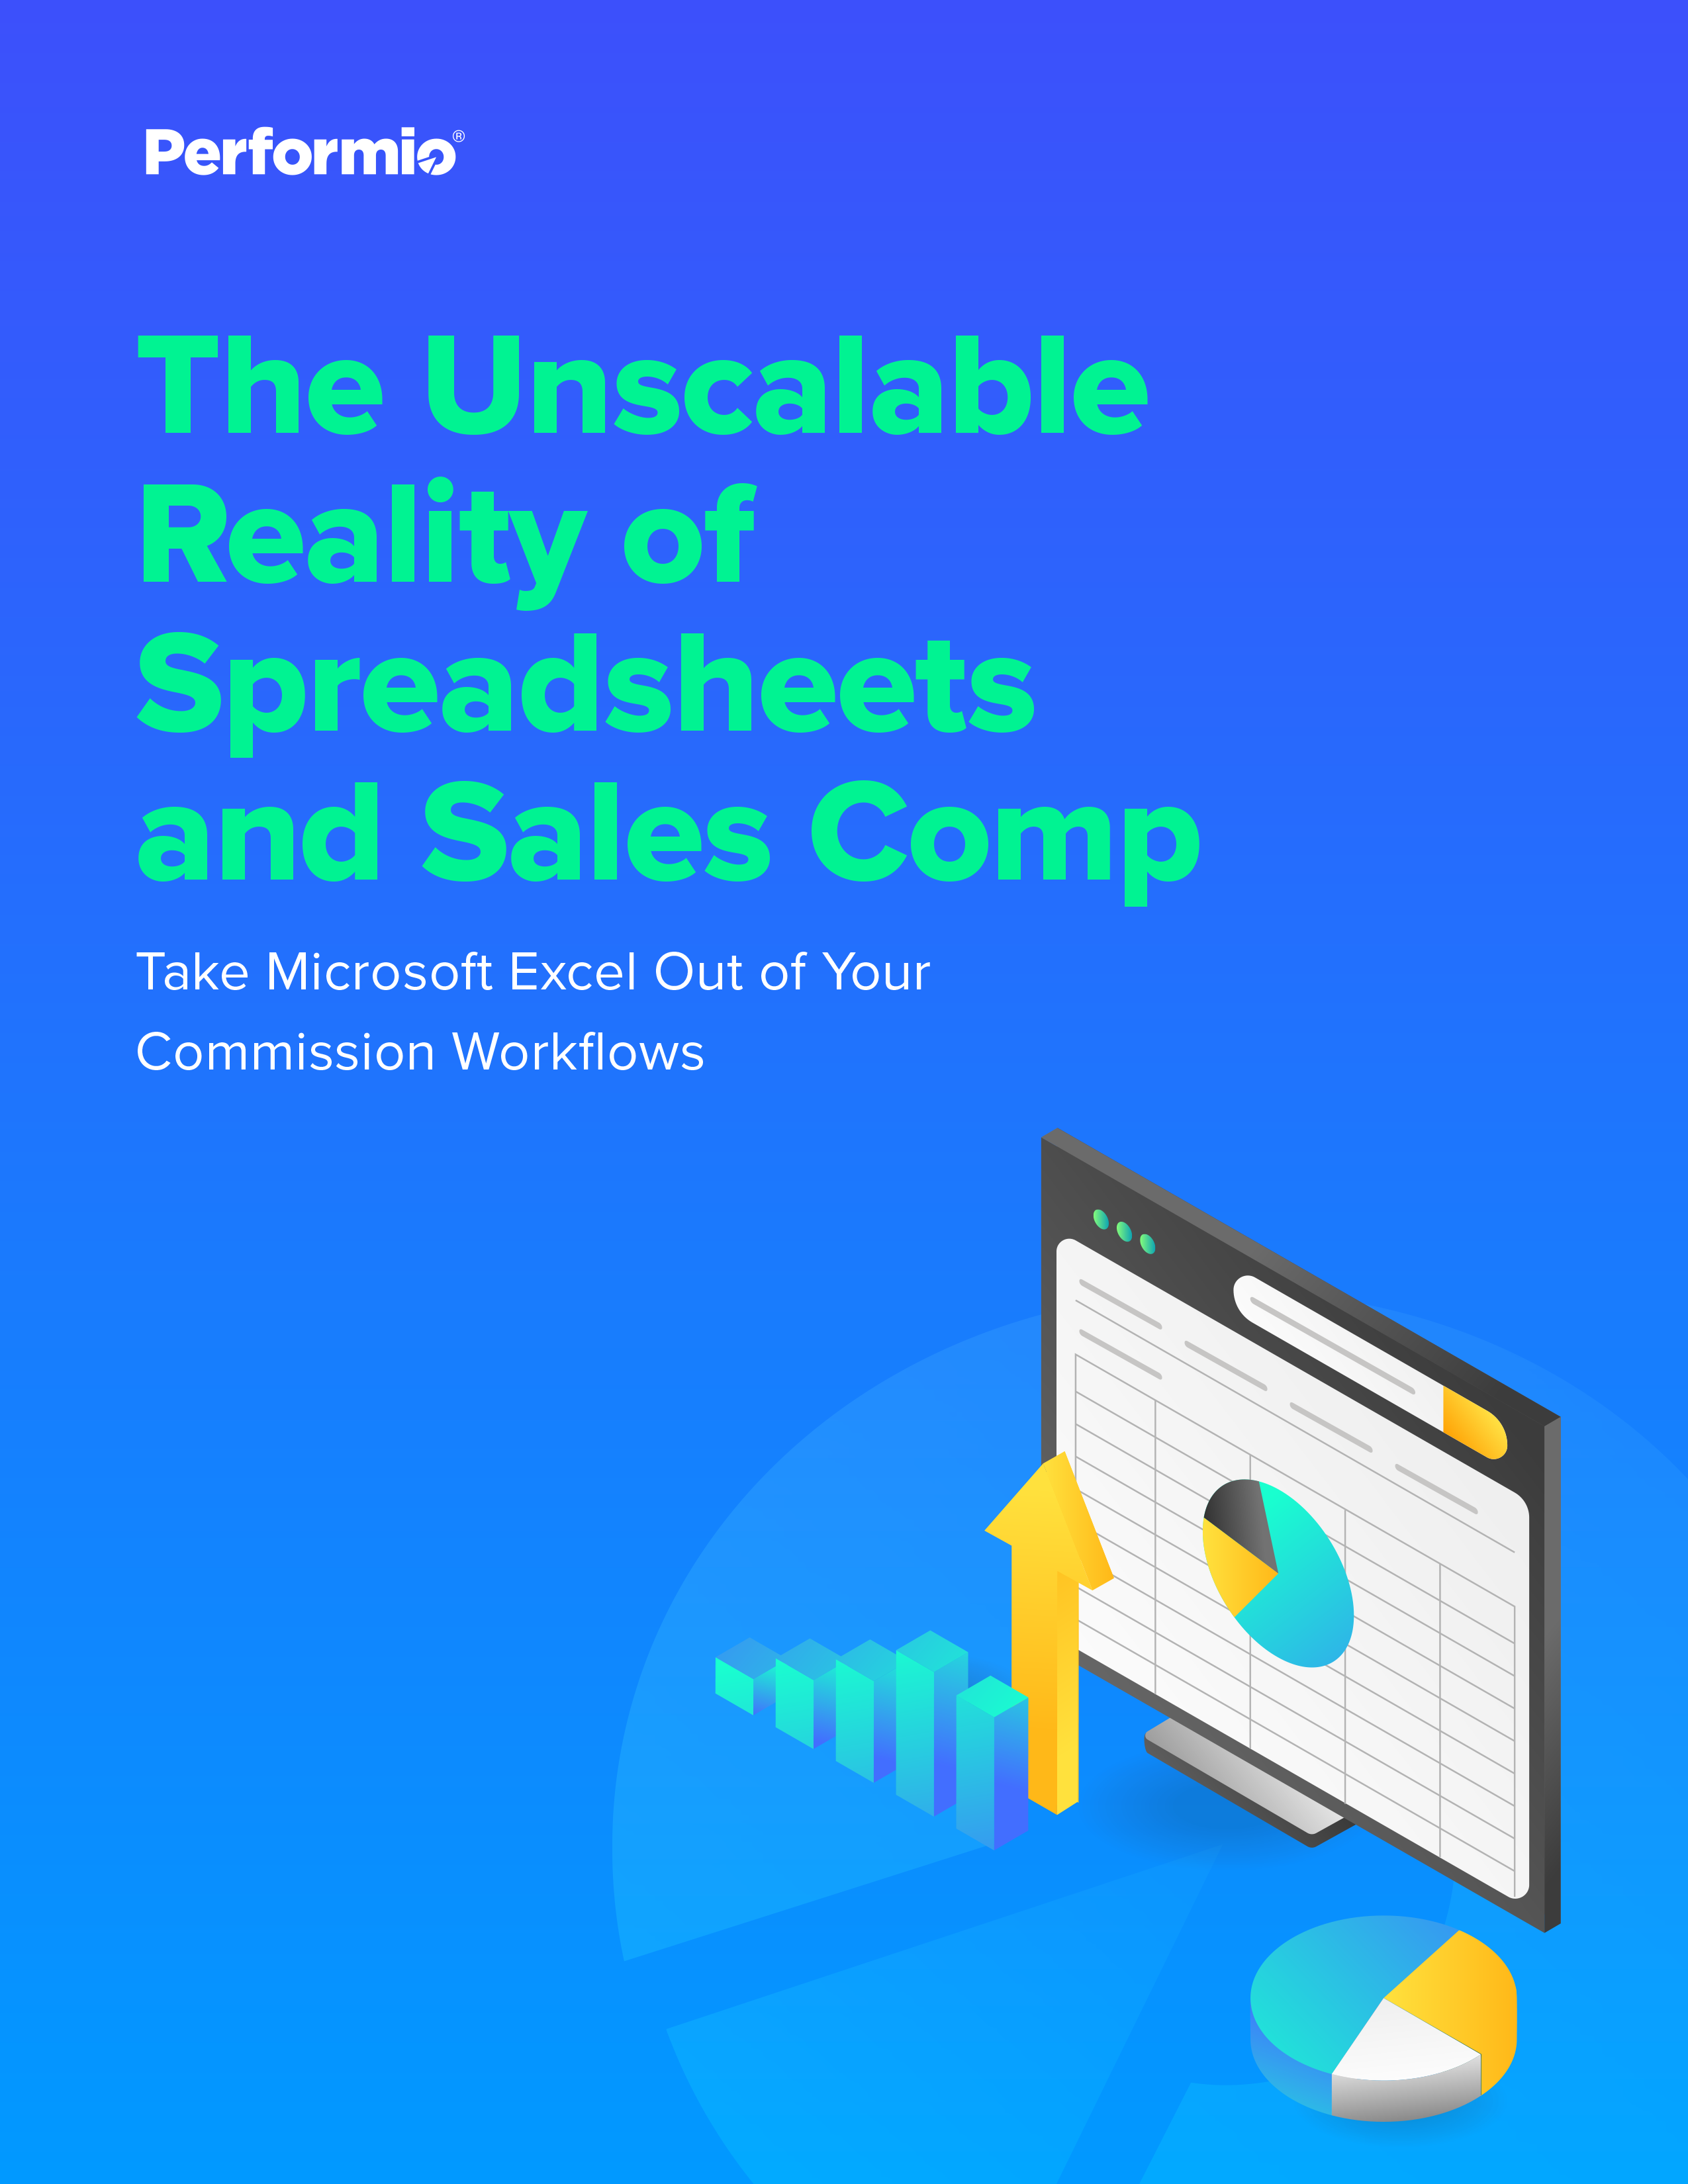 The Unscalable Reality of Spreadsheets and Sales Comp